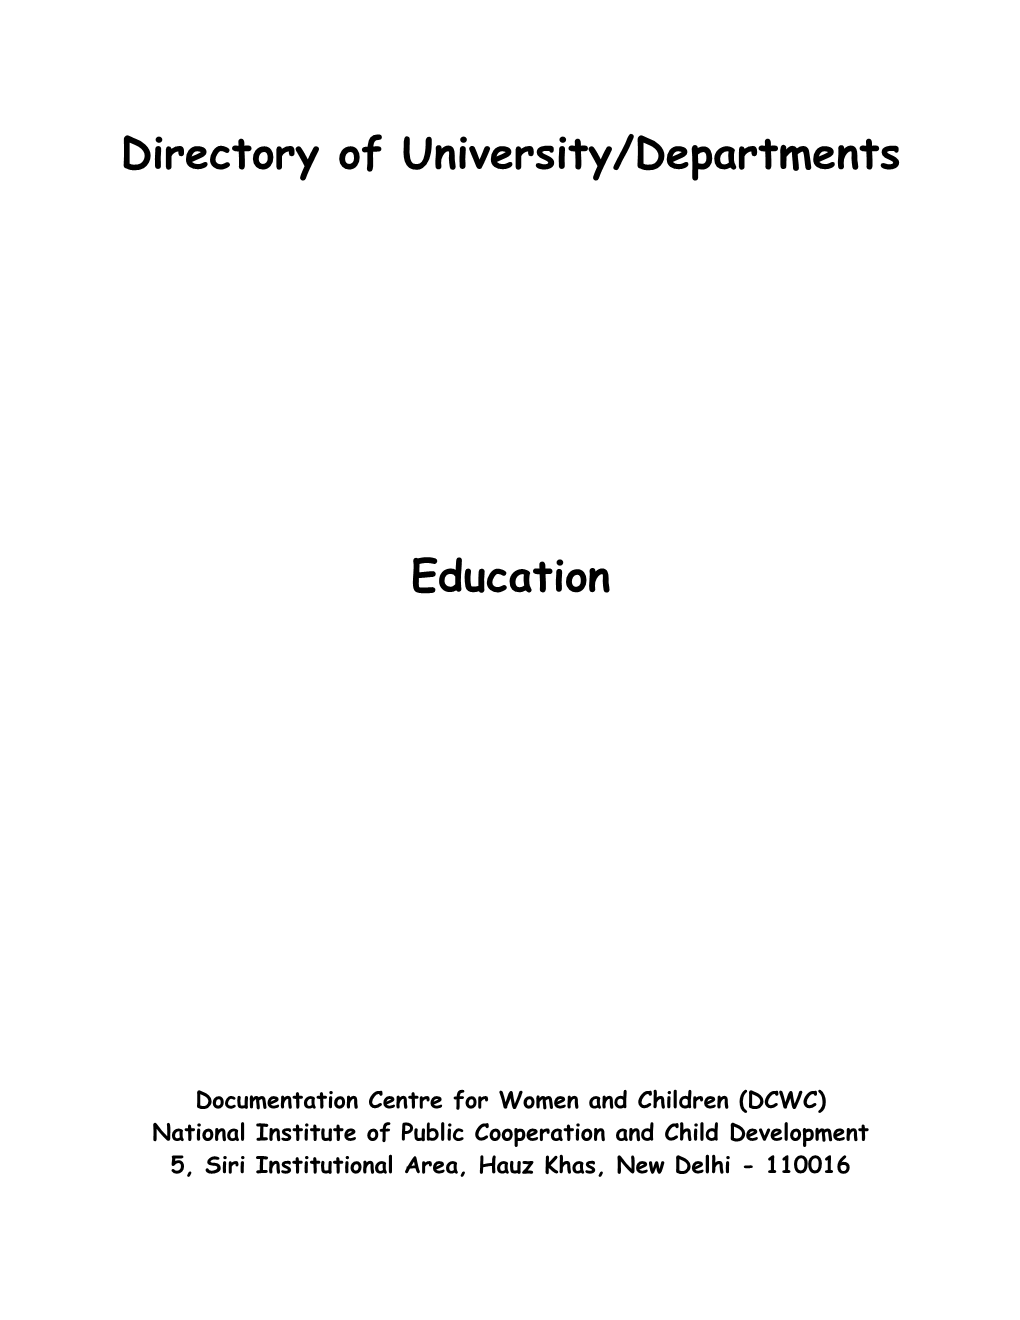 Directory of University/Departments-Education